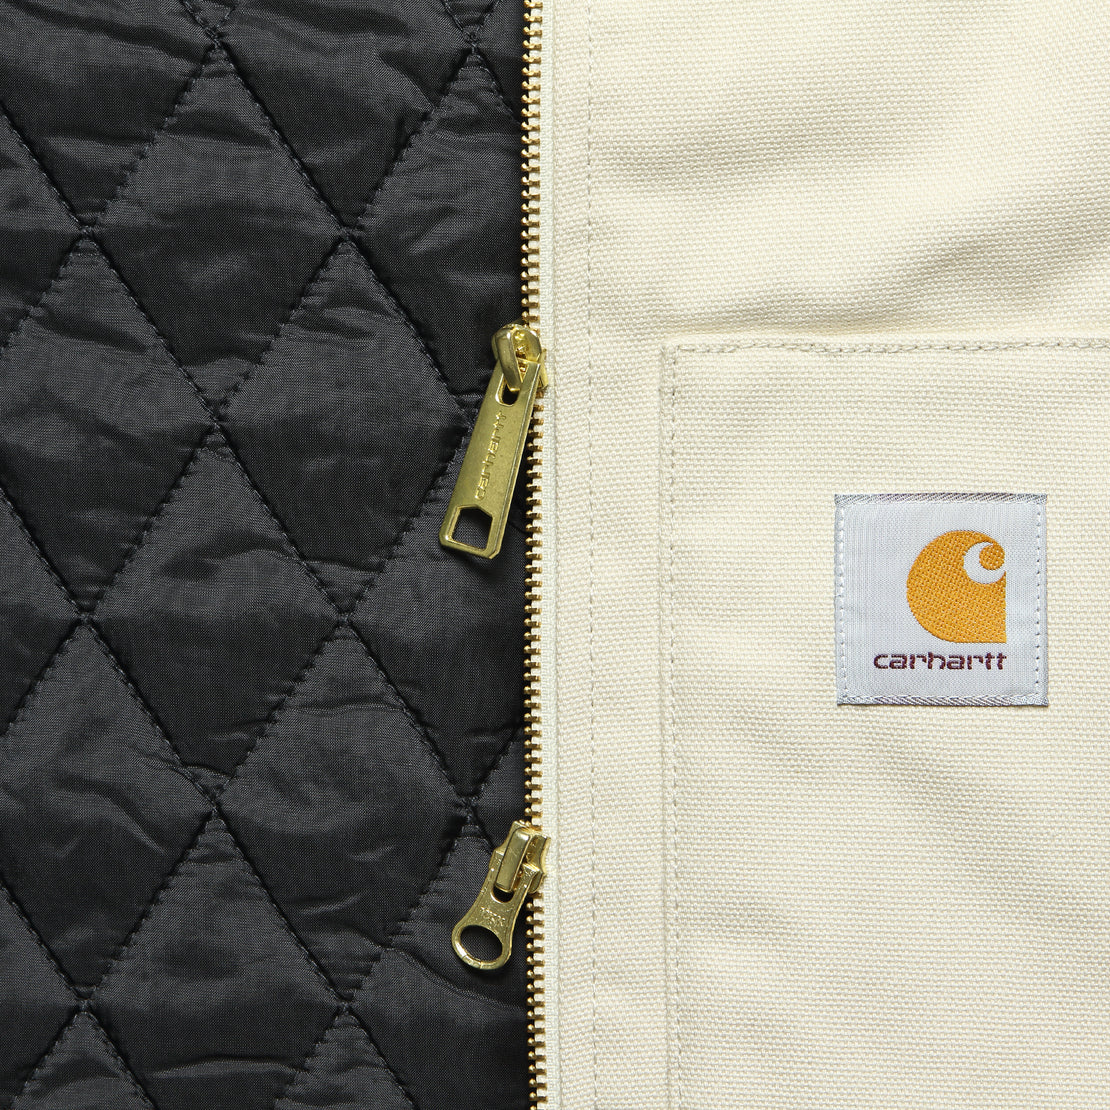 Dearborn Canvas 12oz. Vest - Oats - Carhartt WIP - STAG Provisions - Outerwear - Vest